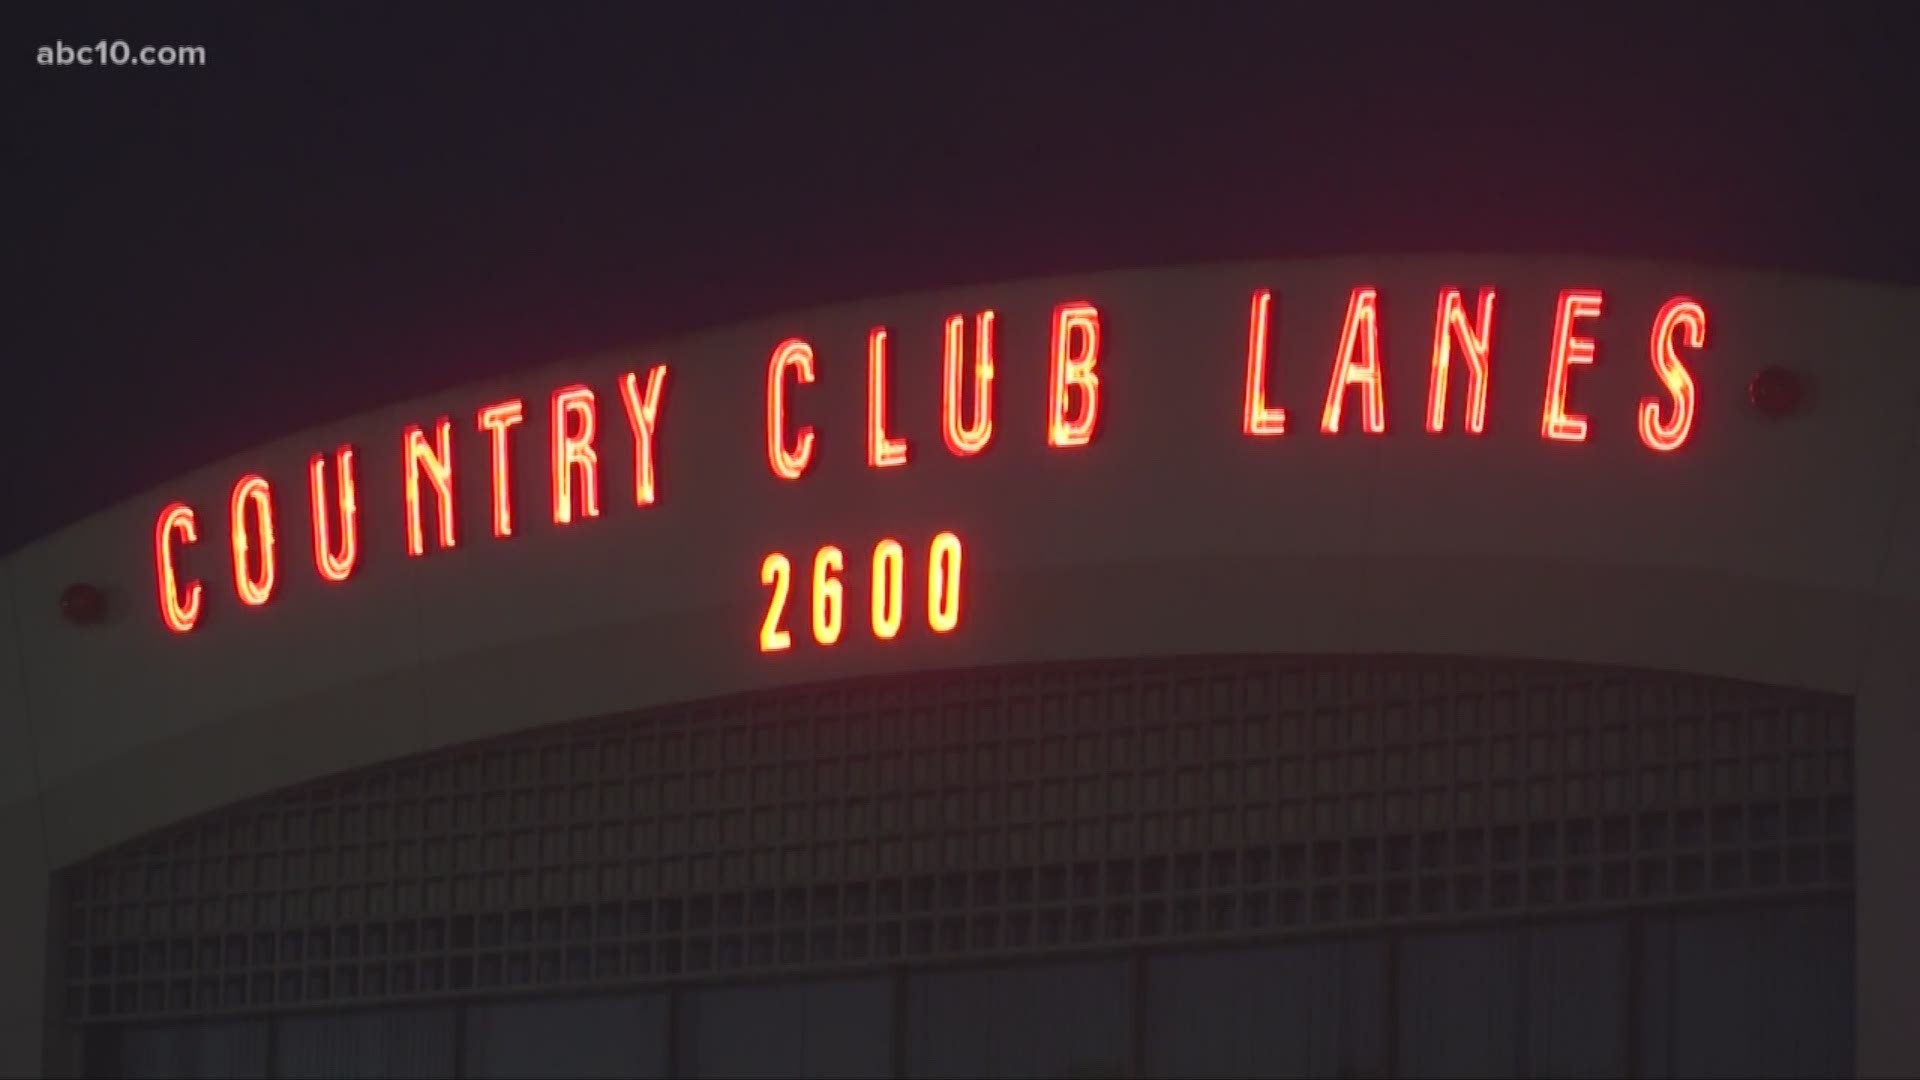 Country Club Lanes bowling alley was always open until the coronavirus crisis, 90+ employees laid off.